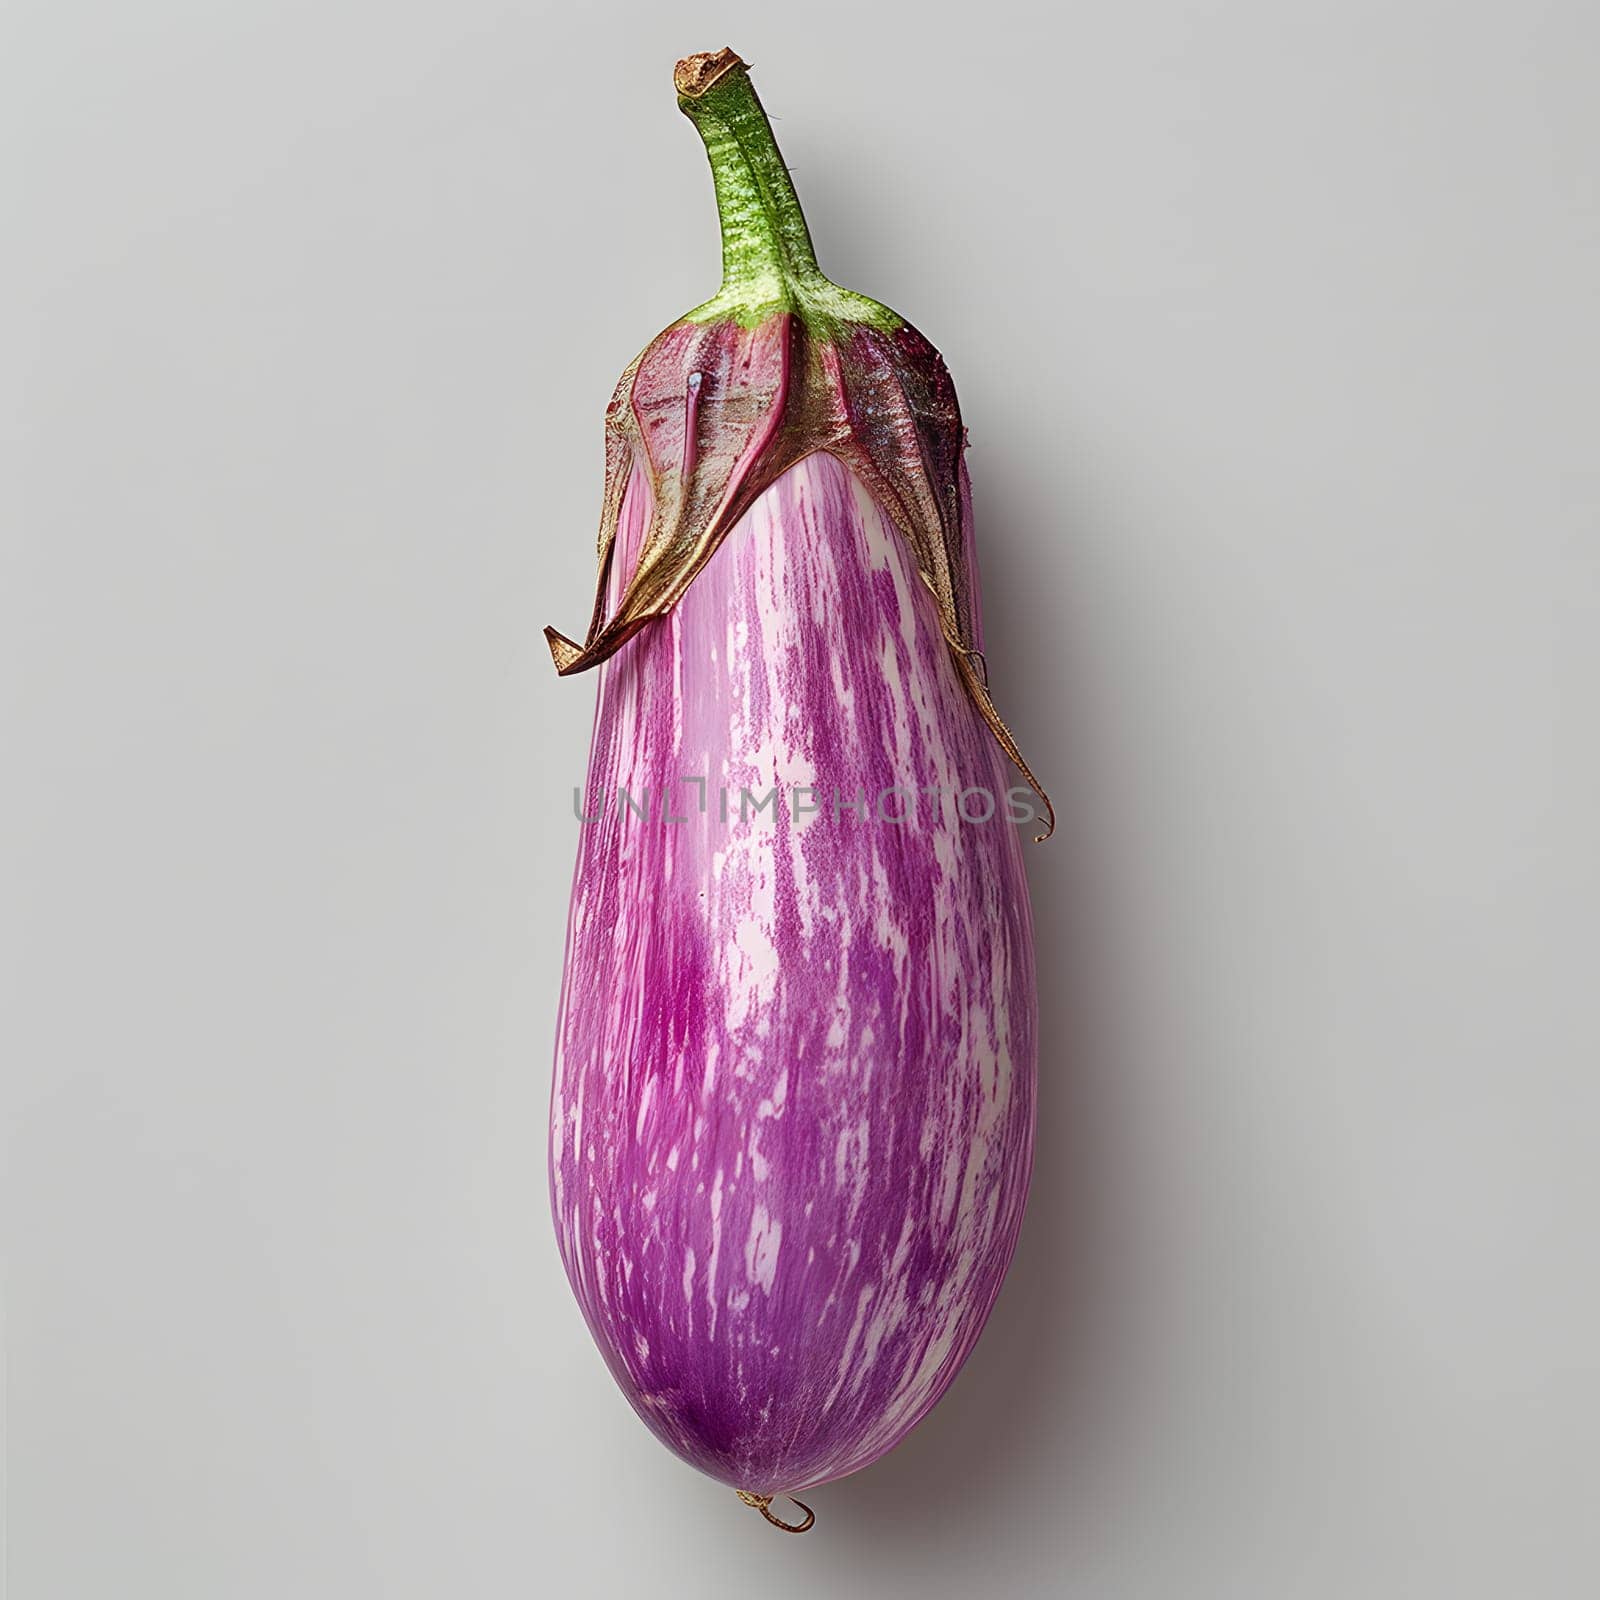 A magenta and white eggplant with a green stem, a vegetable and staple food by Nadtochiy